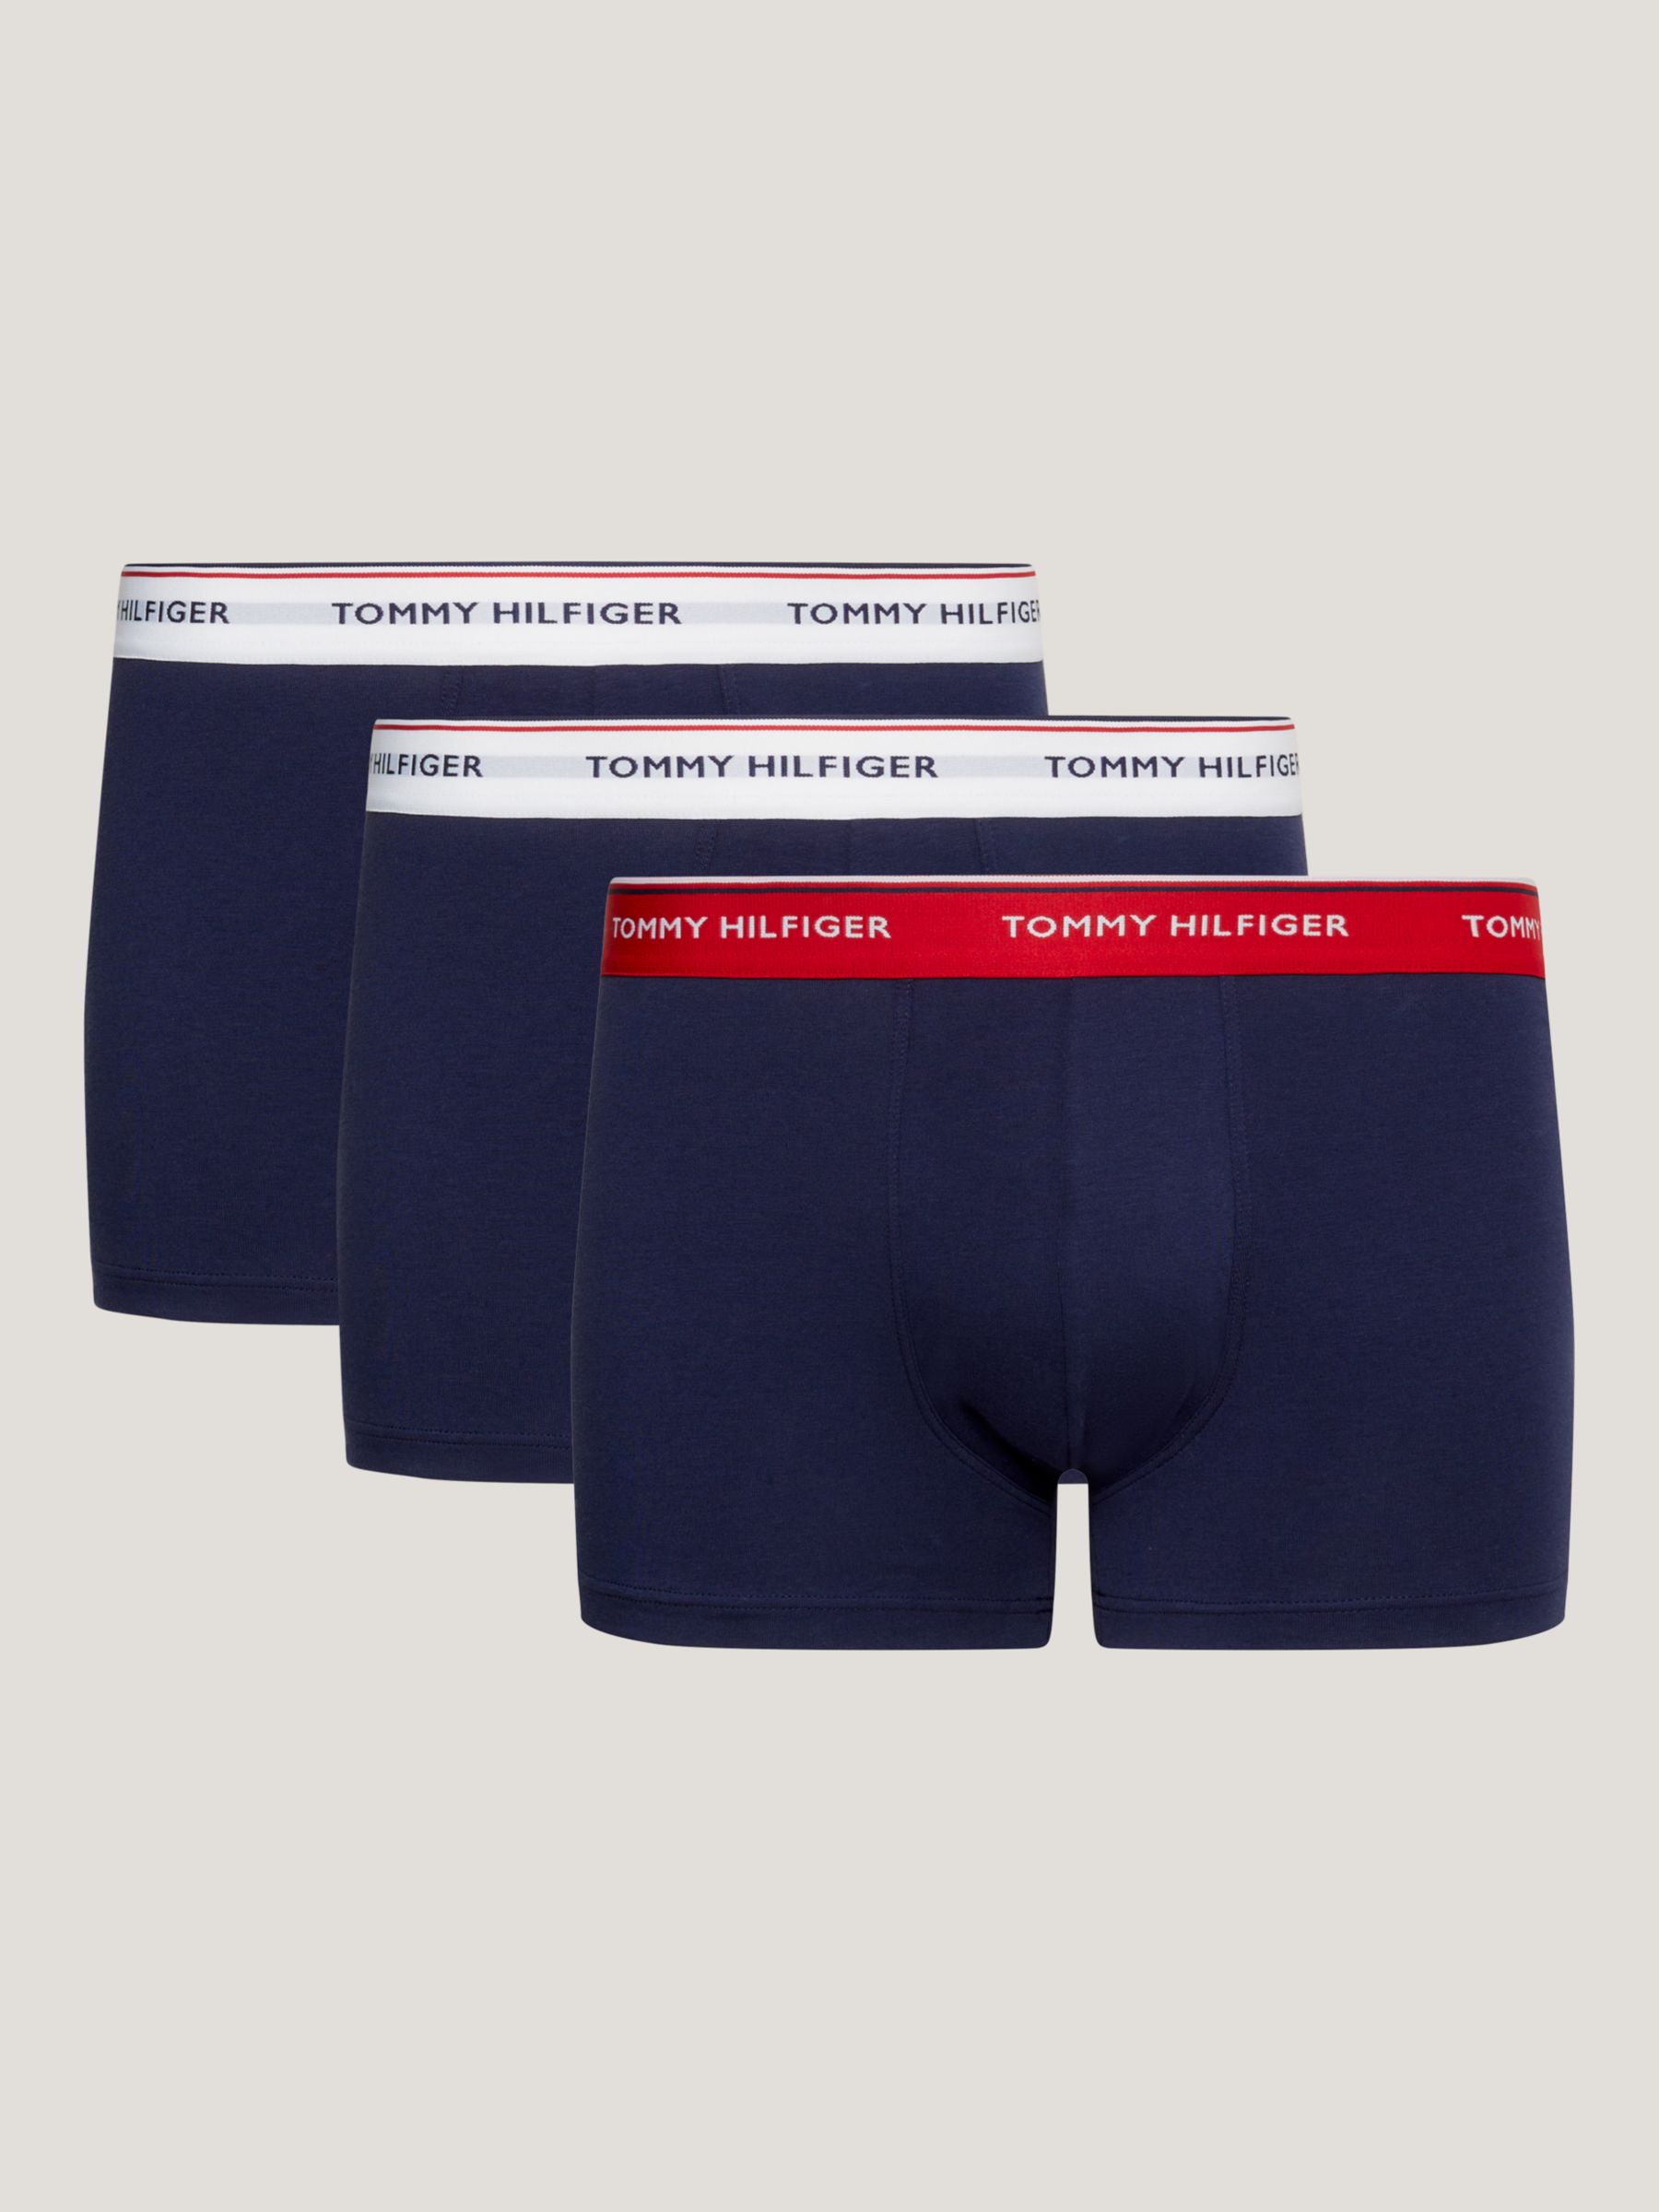 Tommy Hilfiger Cotton Jersey Trunks, Pack of 3, Multi/Peacoat at